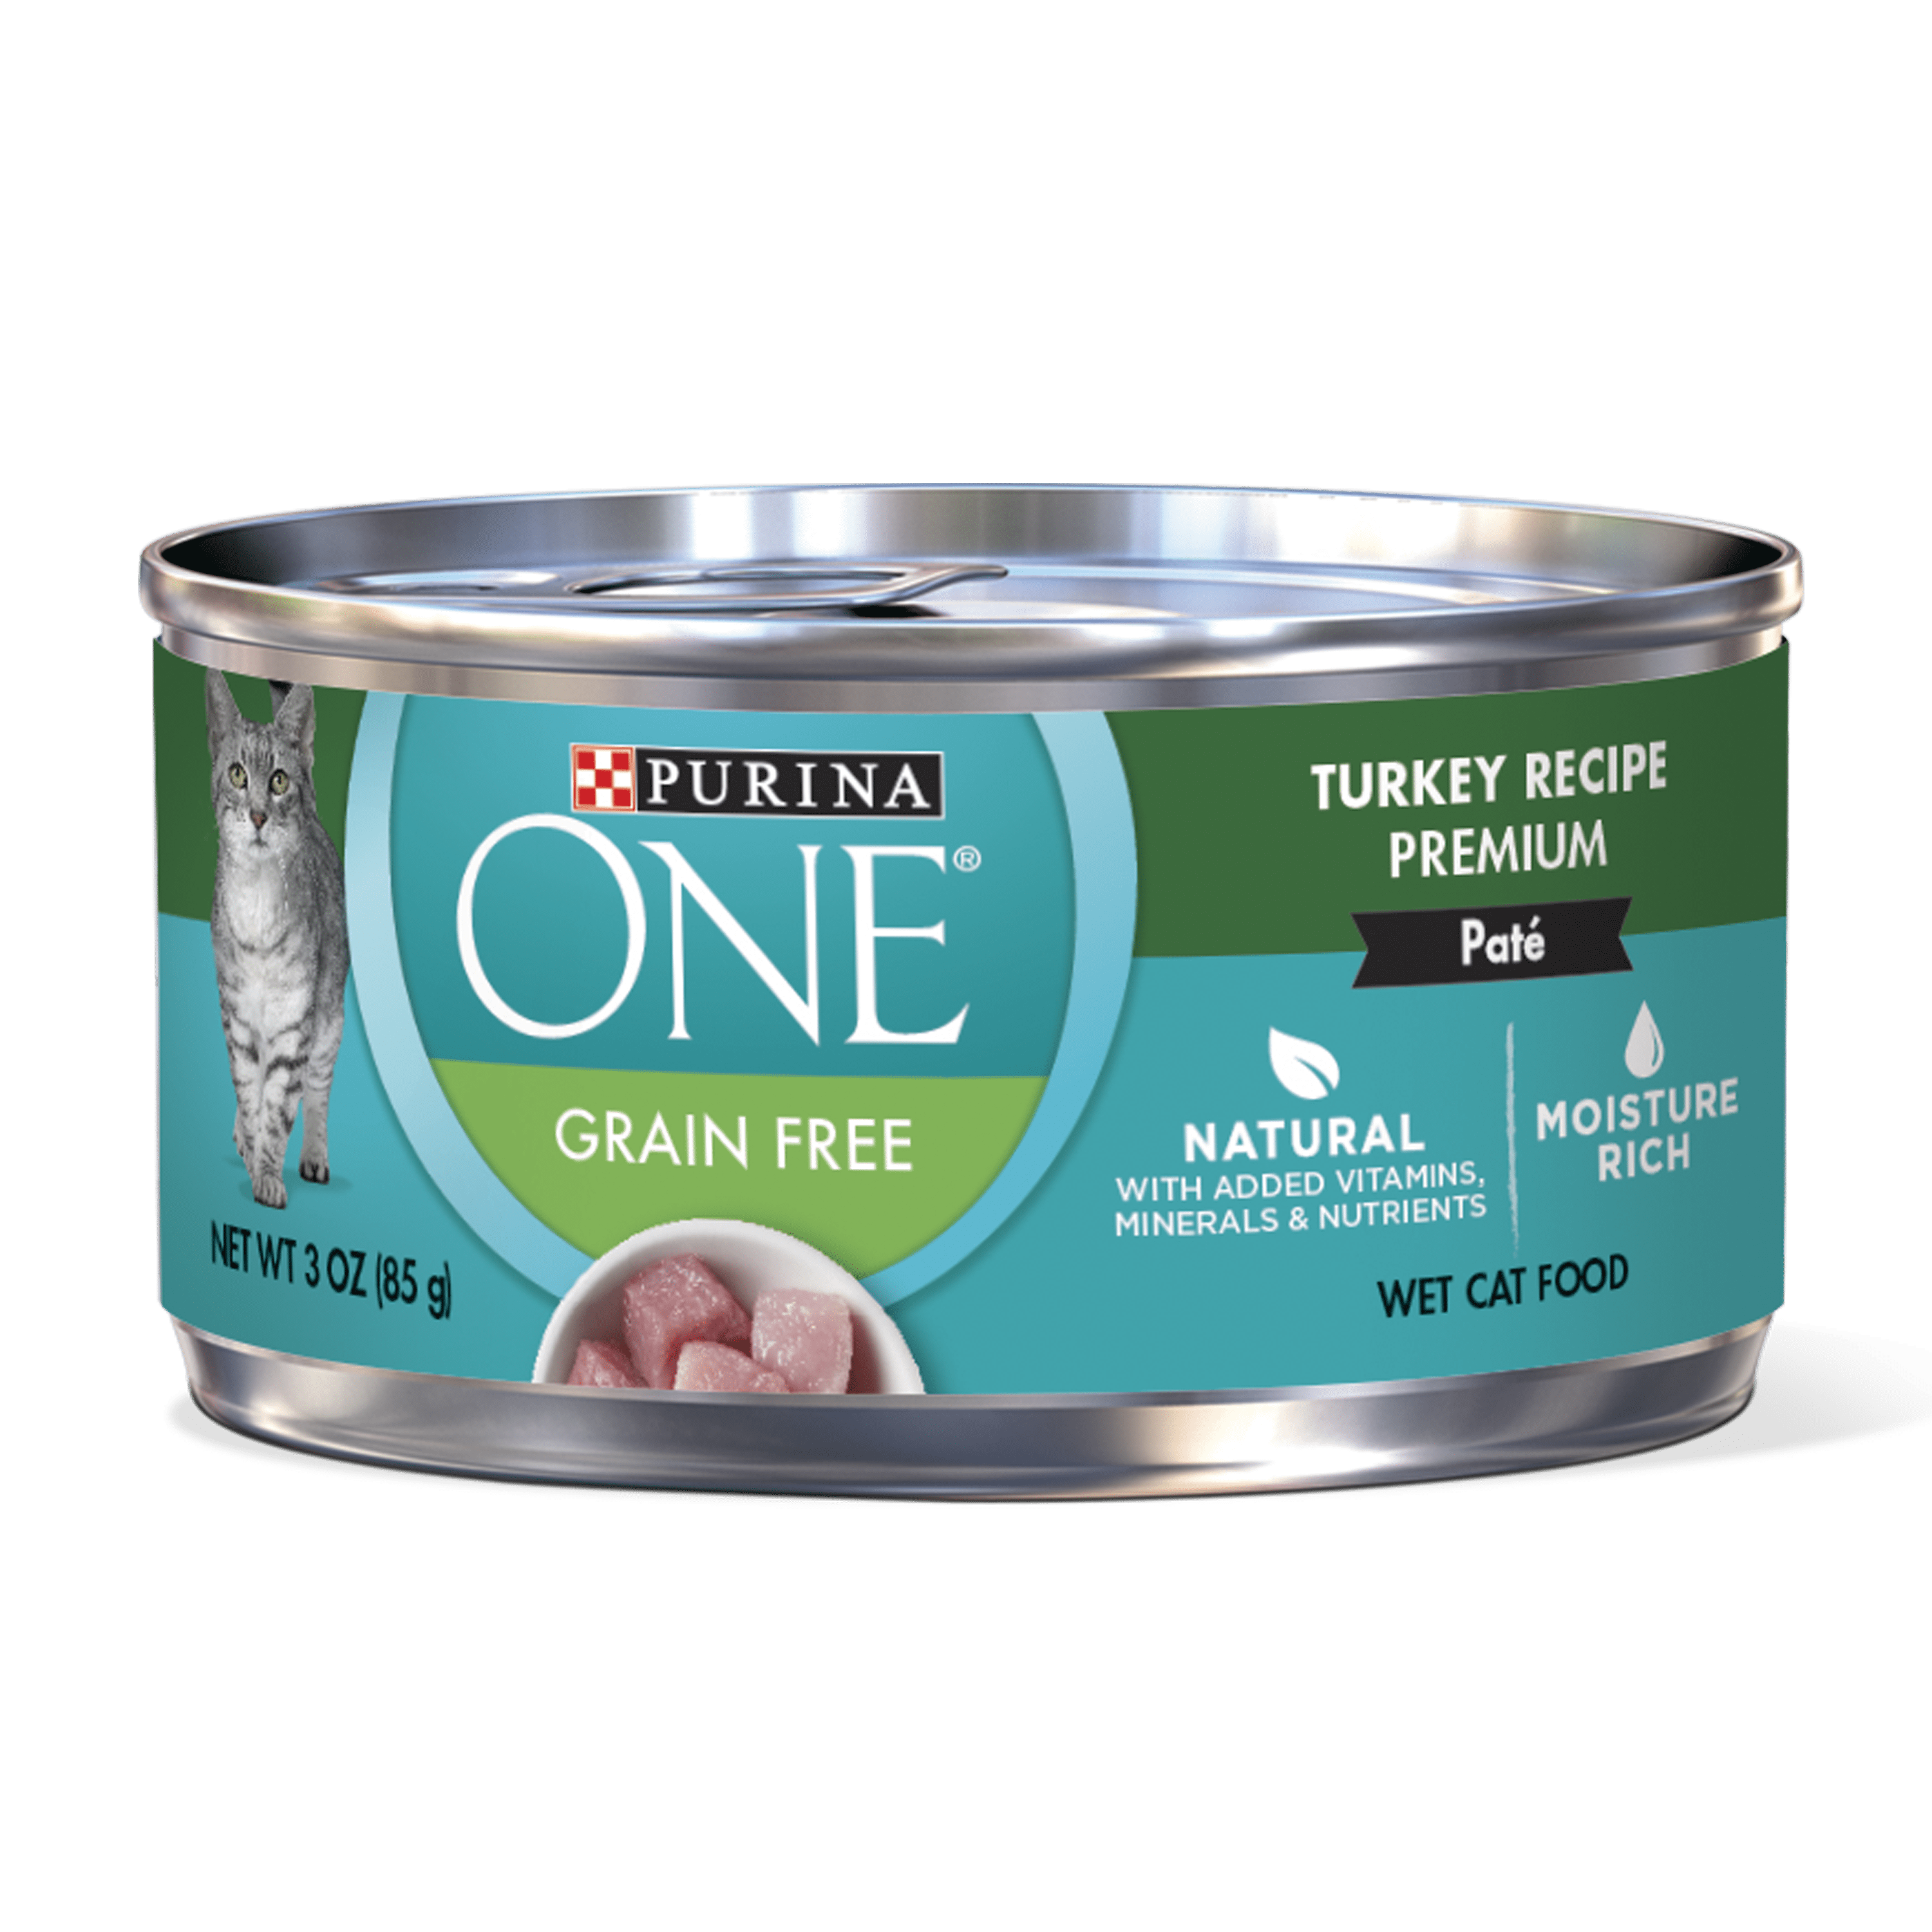 Purina ONE Natural, High Protein, Grain Free Pate Wet Cat Food, Turkey